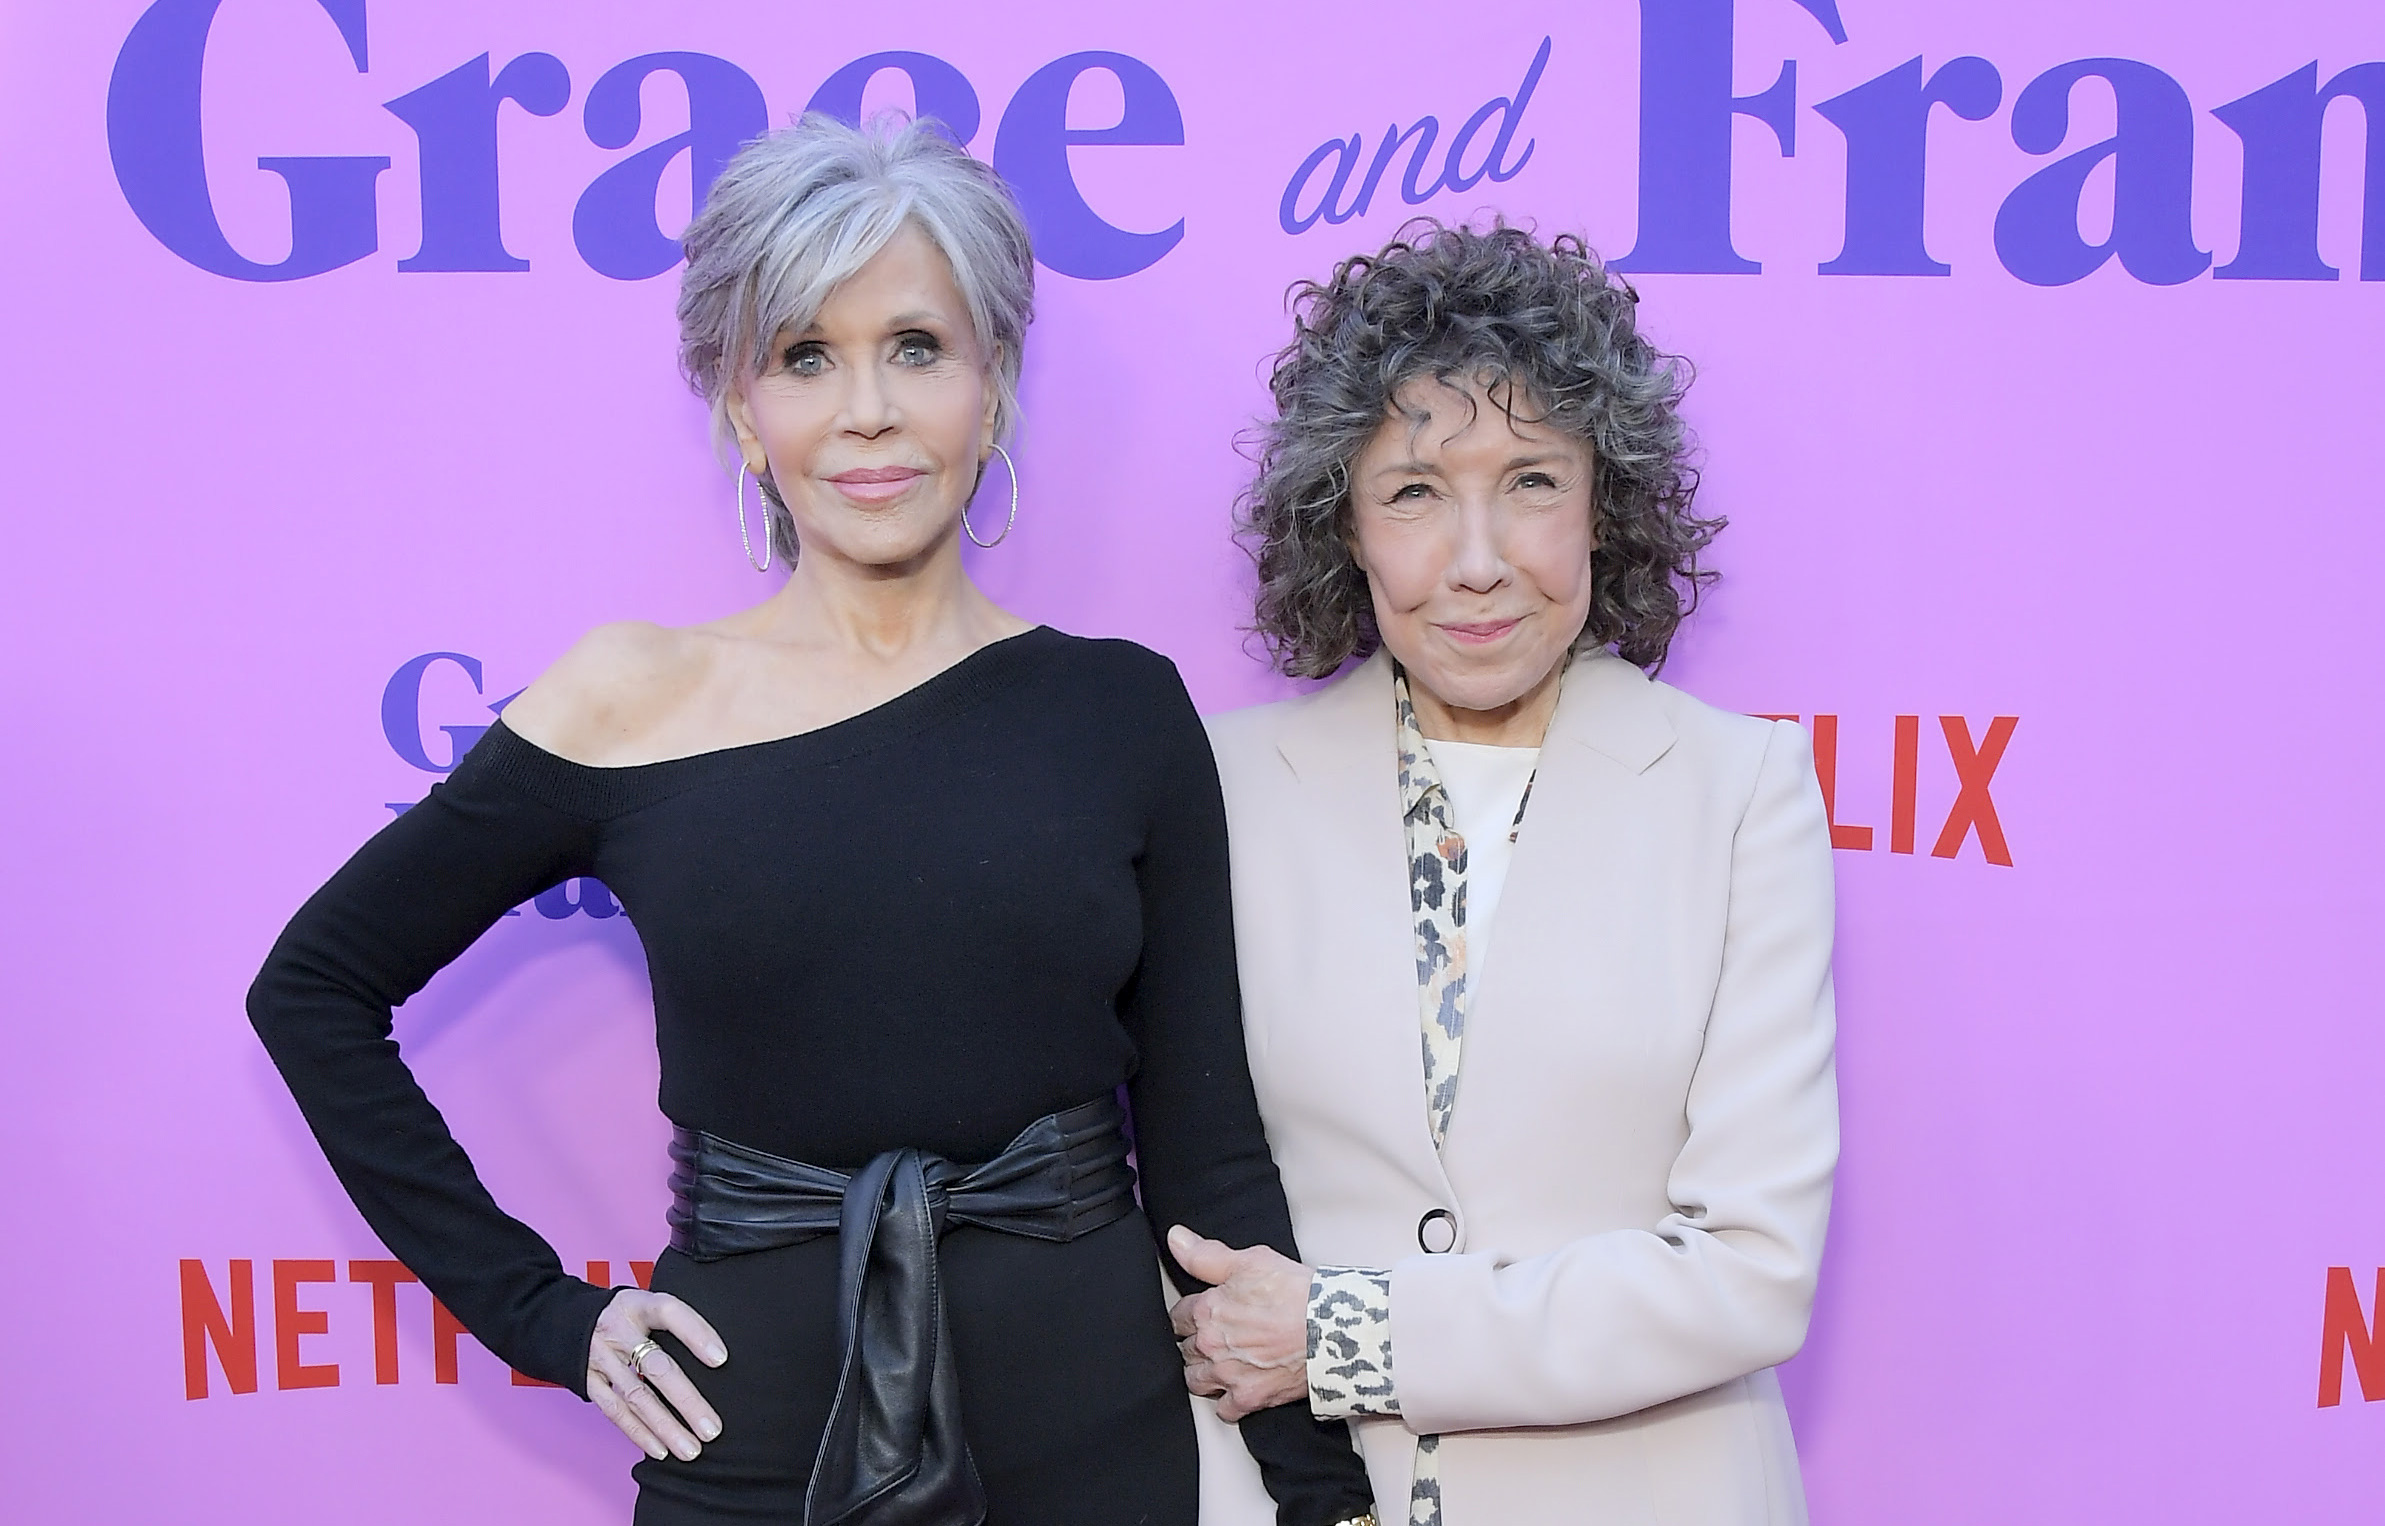 Grace and Frankie: Jane Fonda and Lily Tomlin -- Photo: Charley Gallay/Getty Images for Netflix